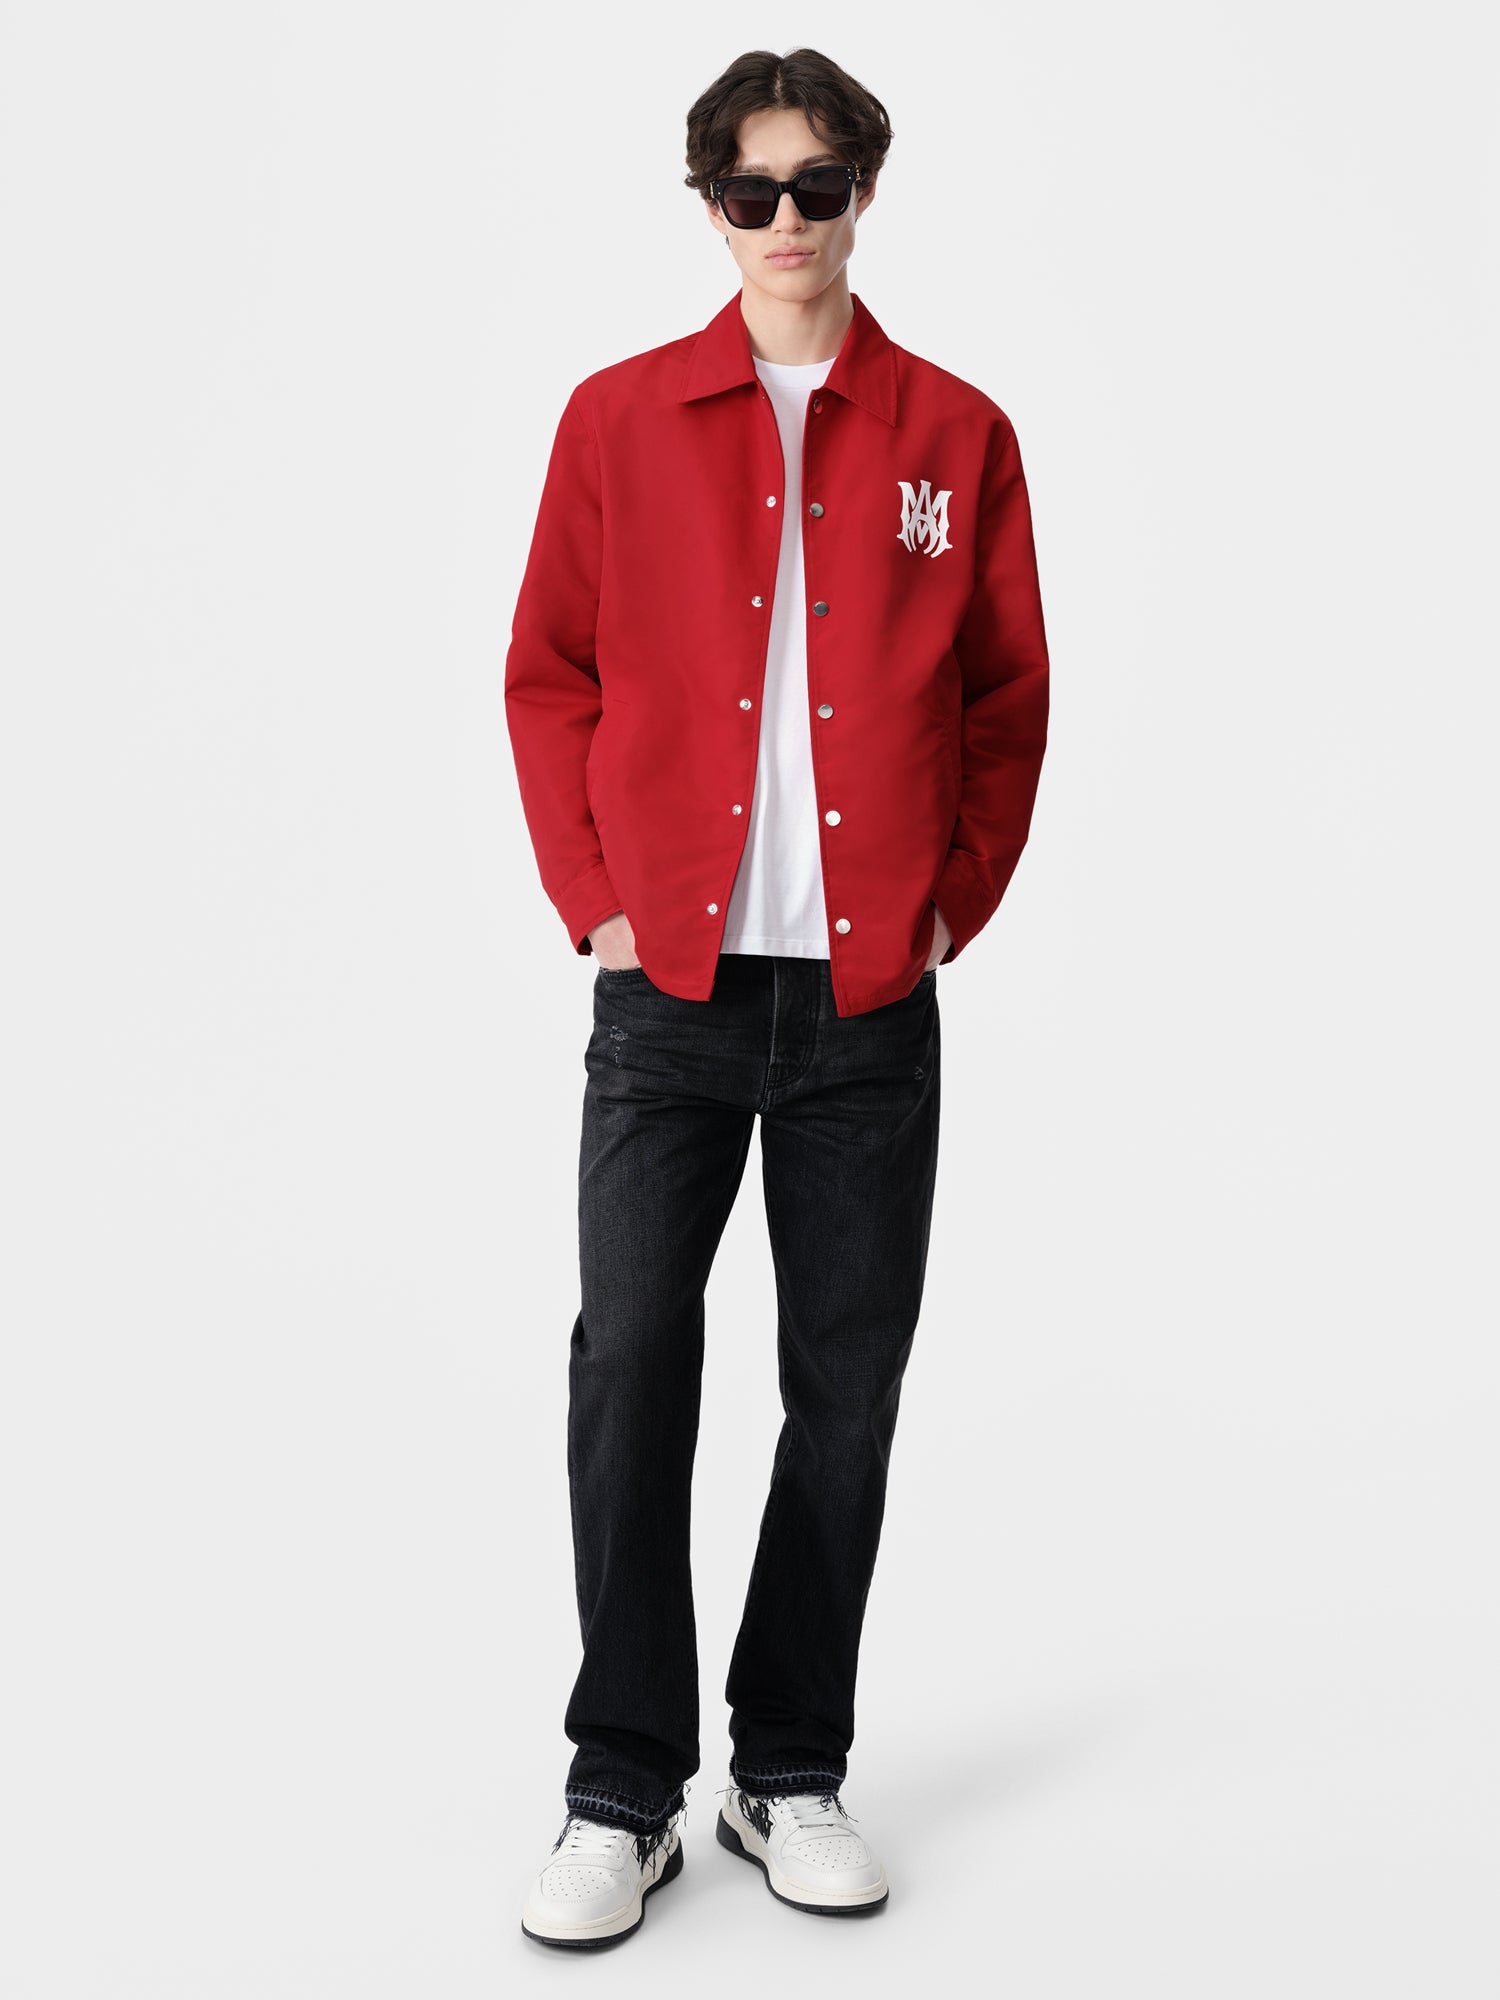 Product MA COACH JACKET - Red featured image